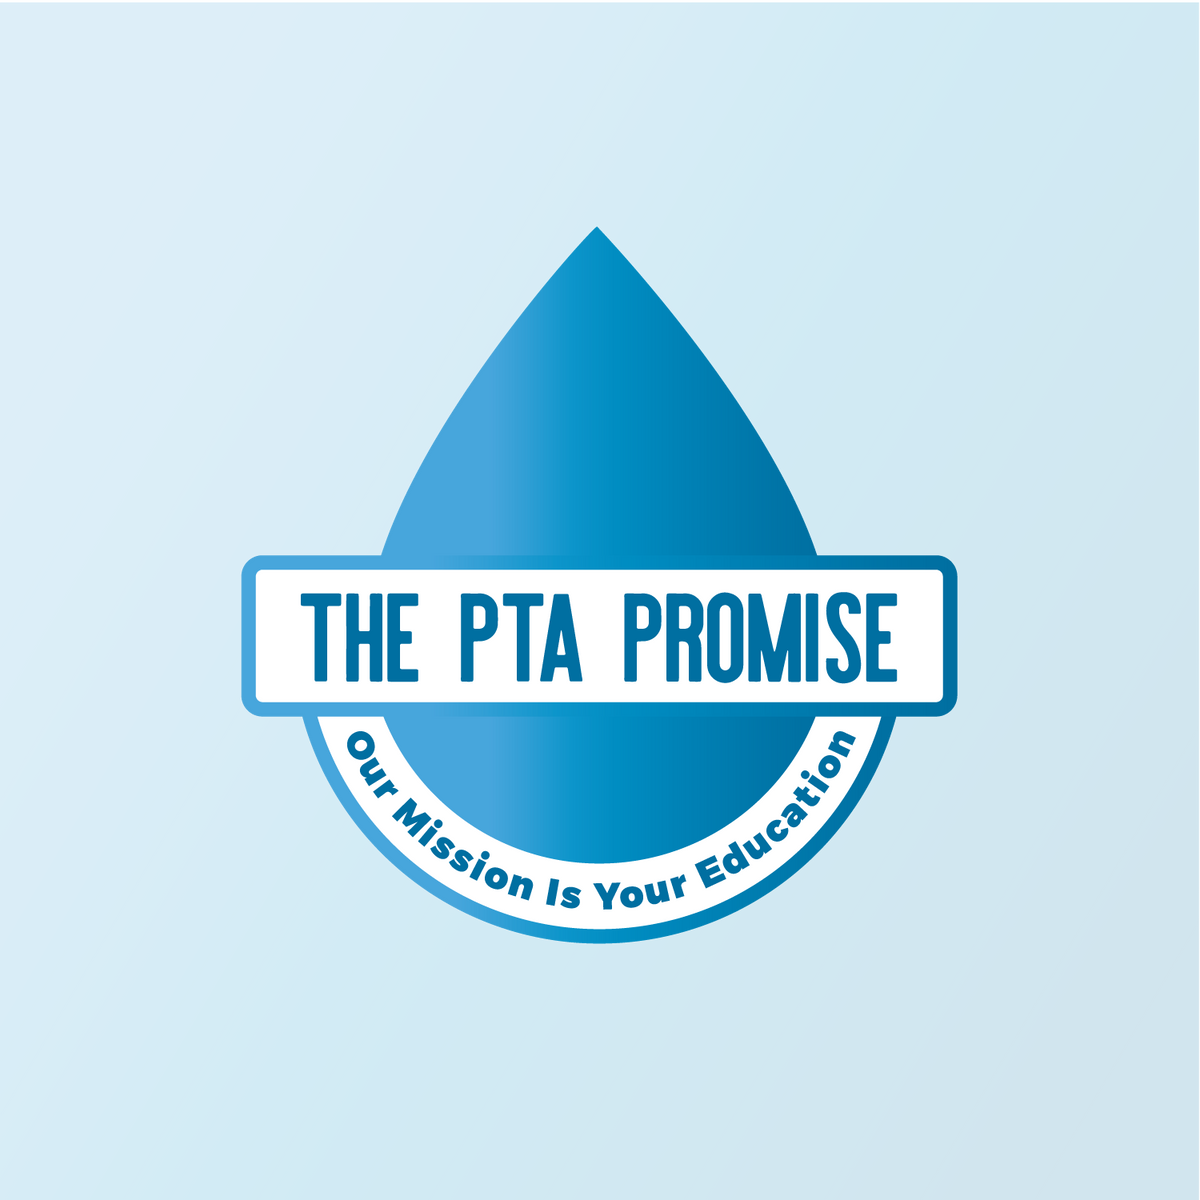 The PTA Promise, Our Mission Is Your Education, Pool Training Academy Reviews Promise Motto